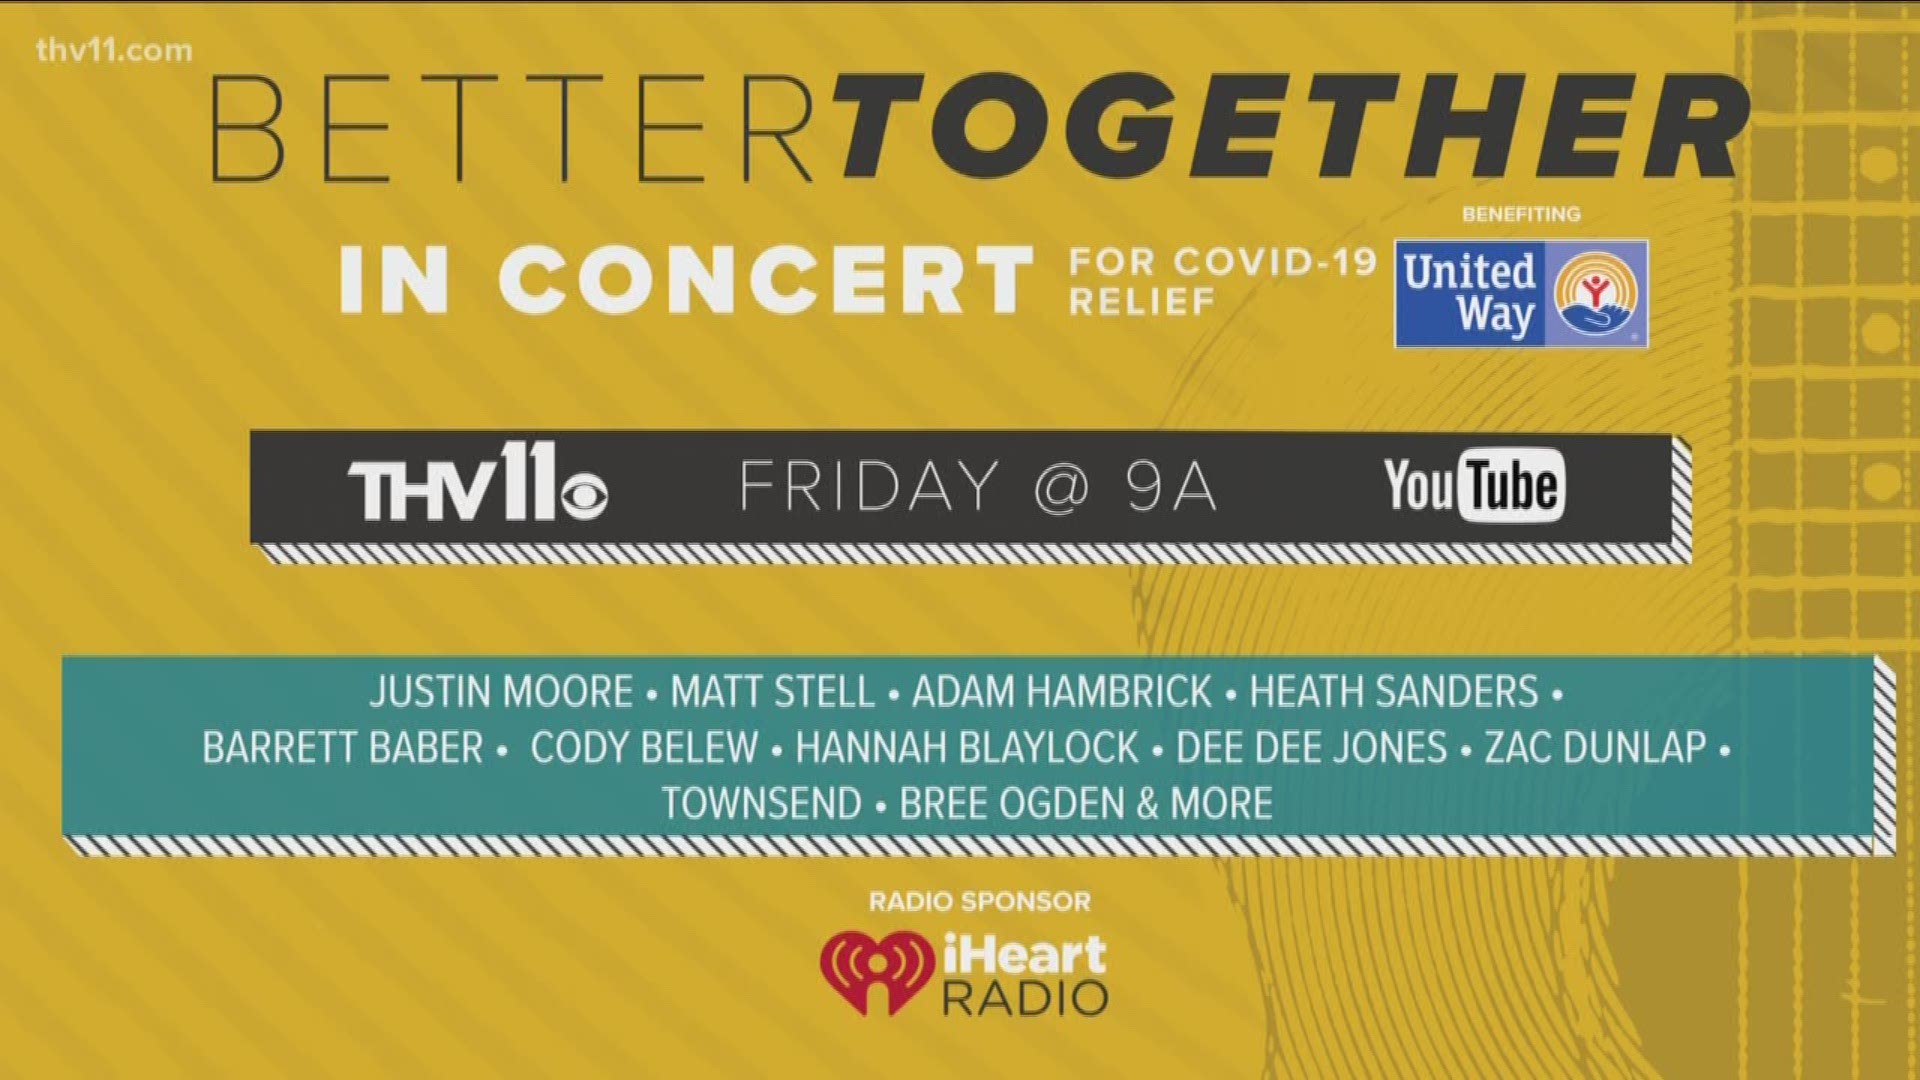 Better Together in Concert will be hosted by THV11's Ashley King on Friday morning at 9 a.m.